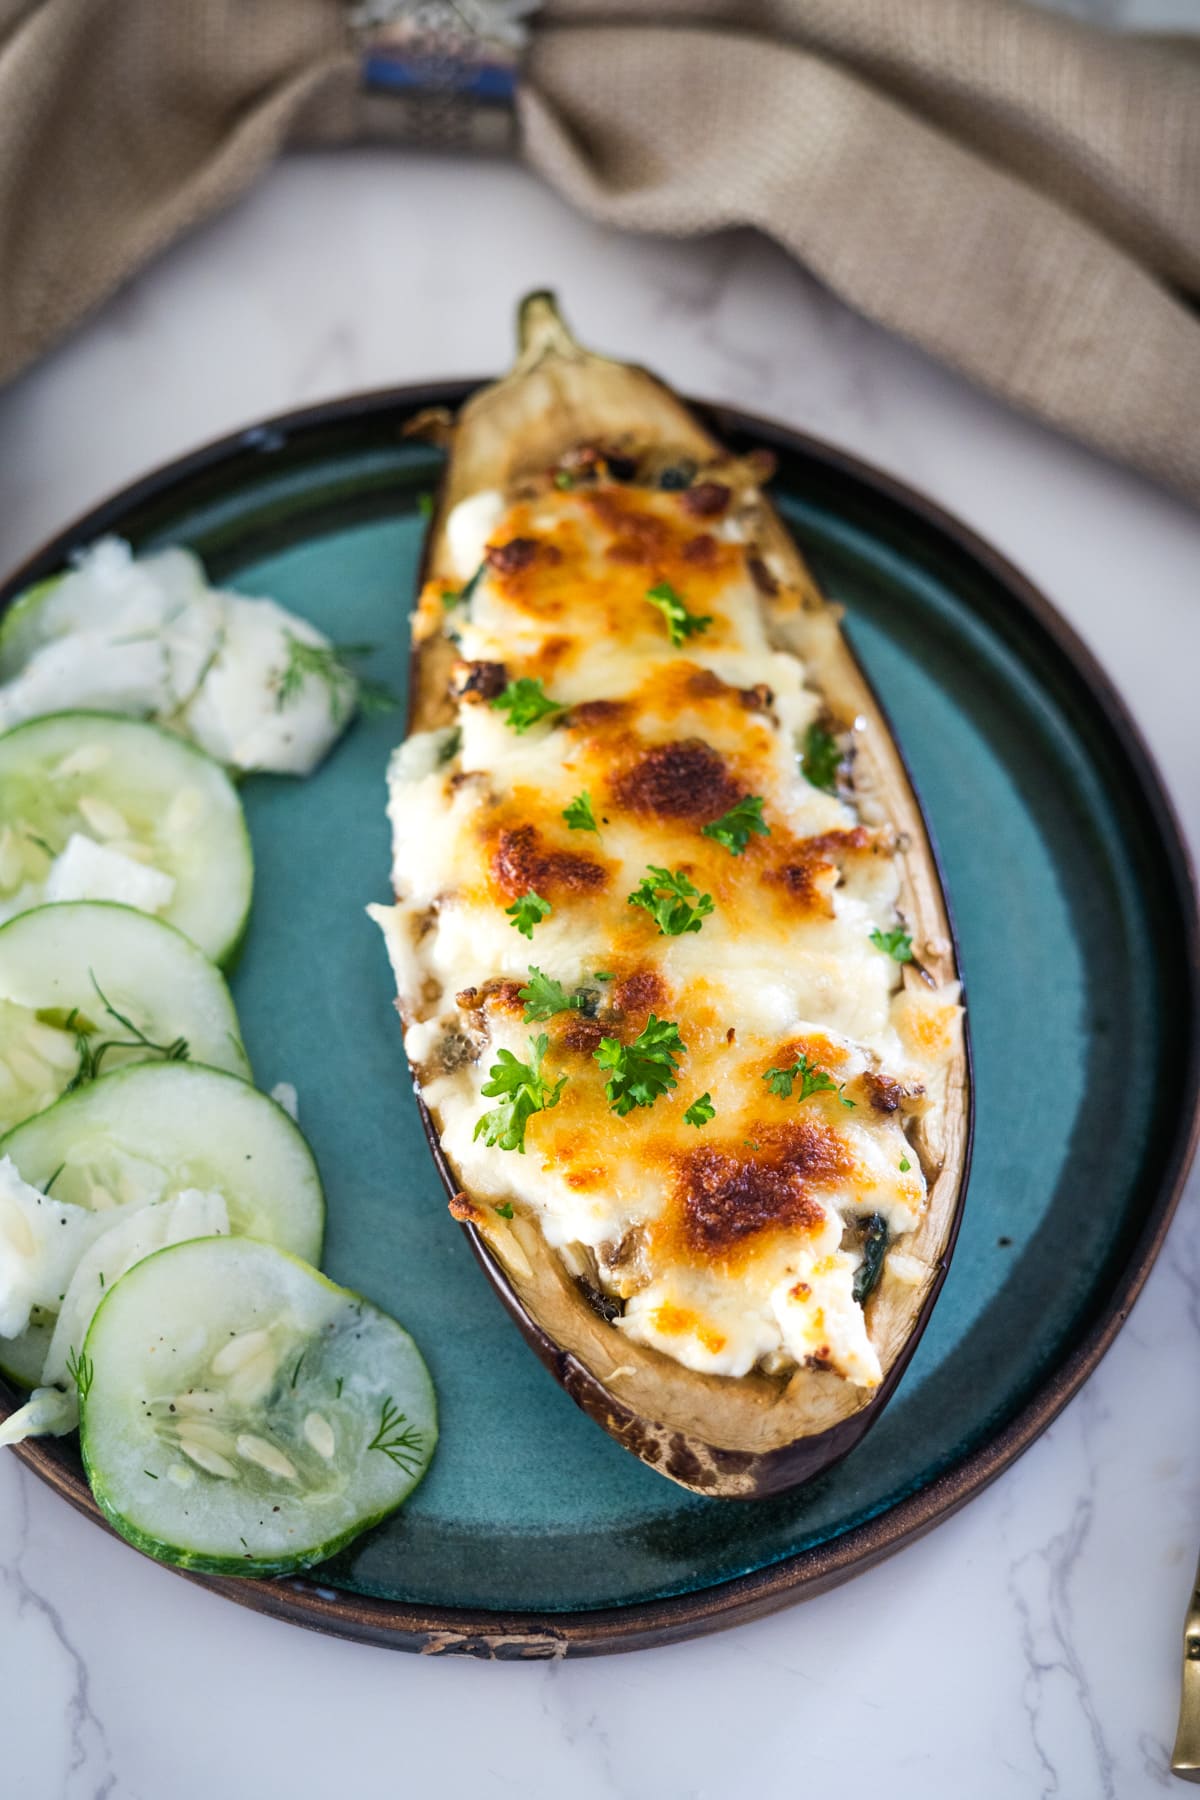 Eggplant boats stuffed with feta cheese and cucumbers on a plate.